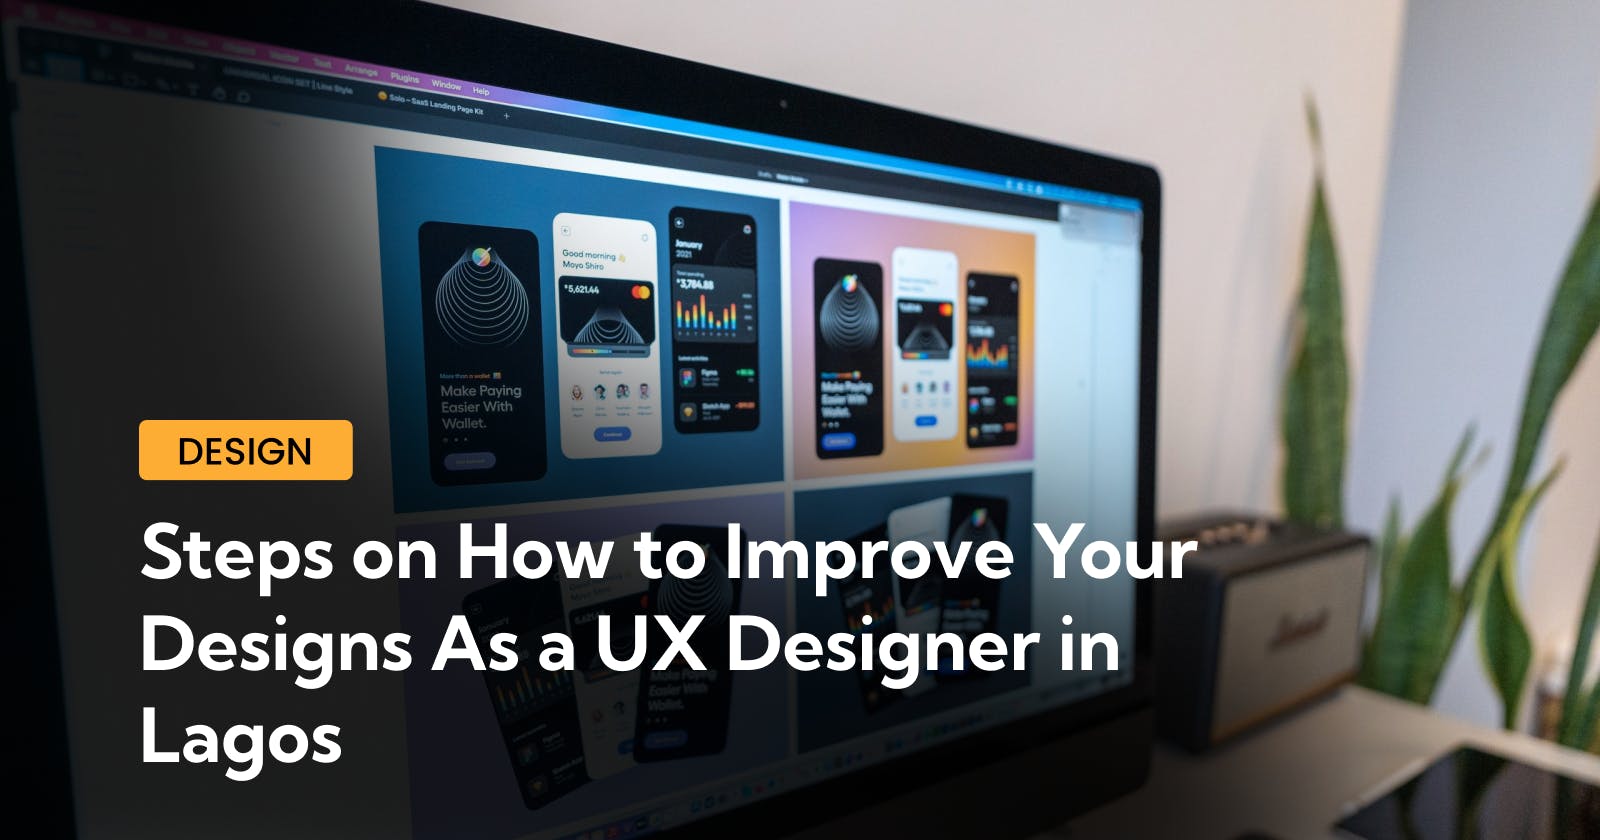 Steps On How To Improve Your Designs As a UX Designer In Lagos